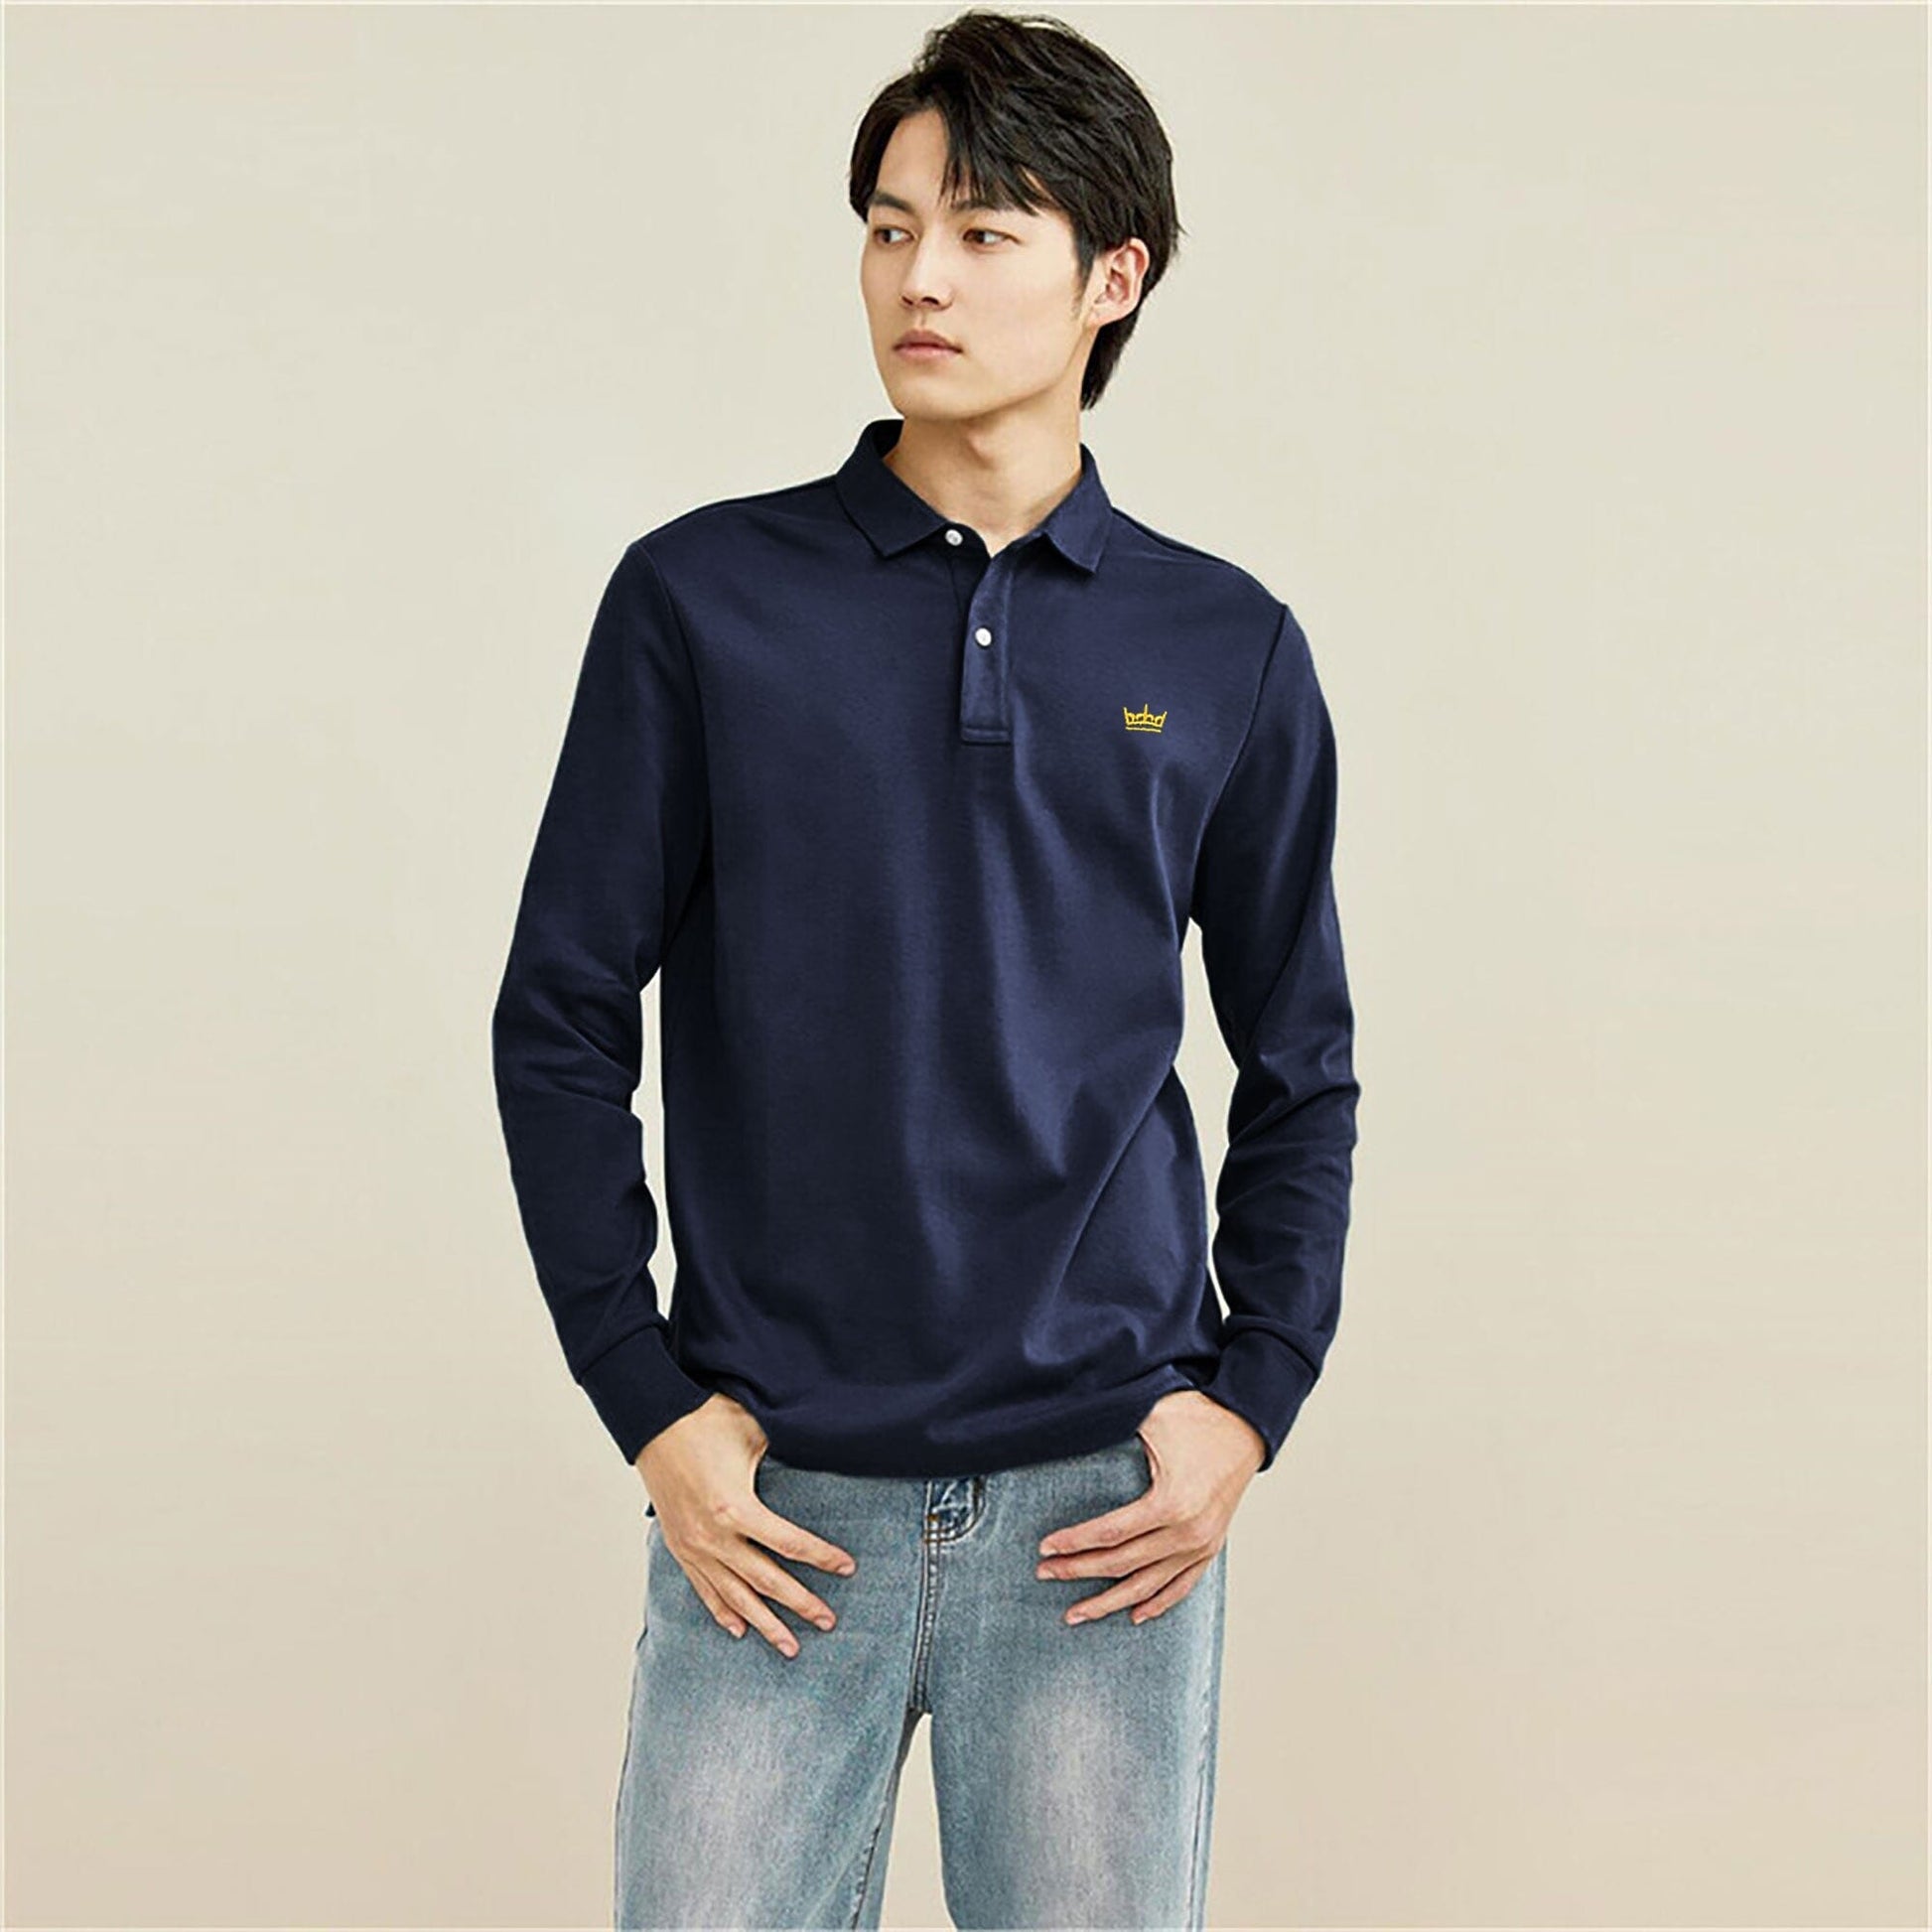 Industrialize Men's Crown Embroidered Minor Fault Long Sleeve Polo Shirt Men's Polo Shirt IST Navy 2XS 